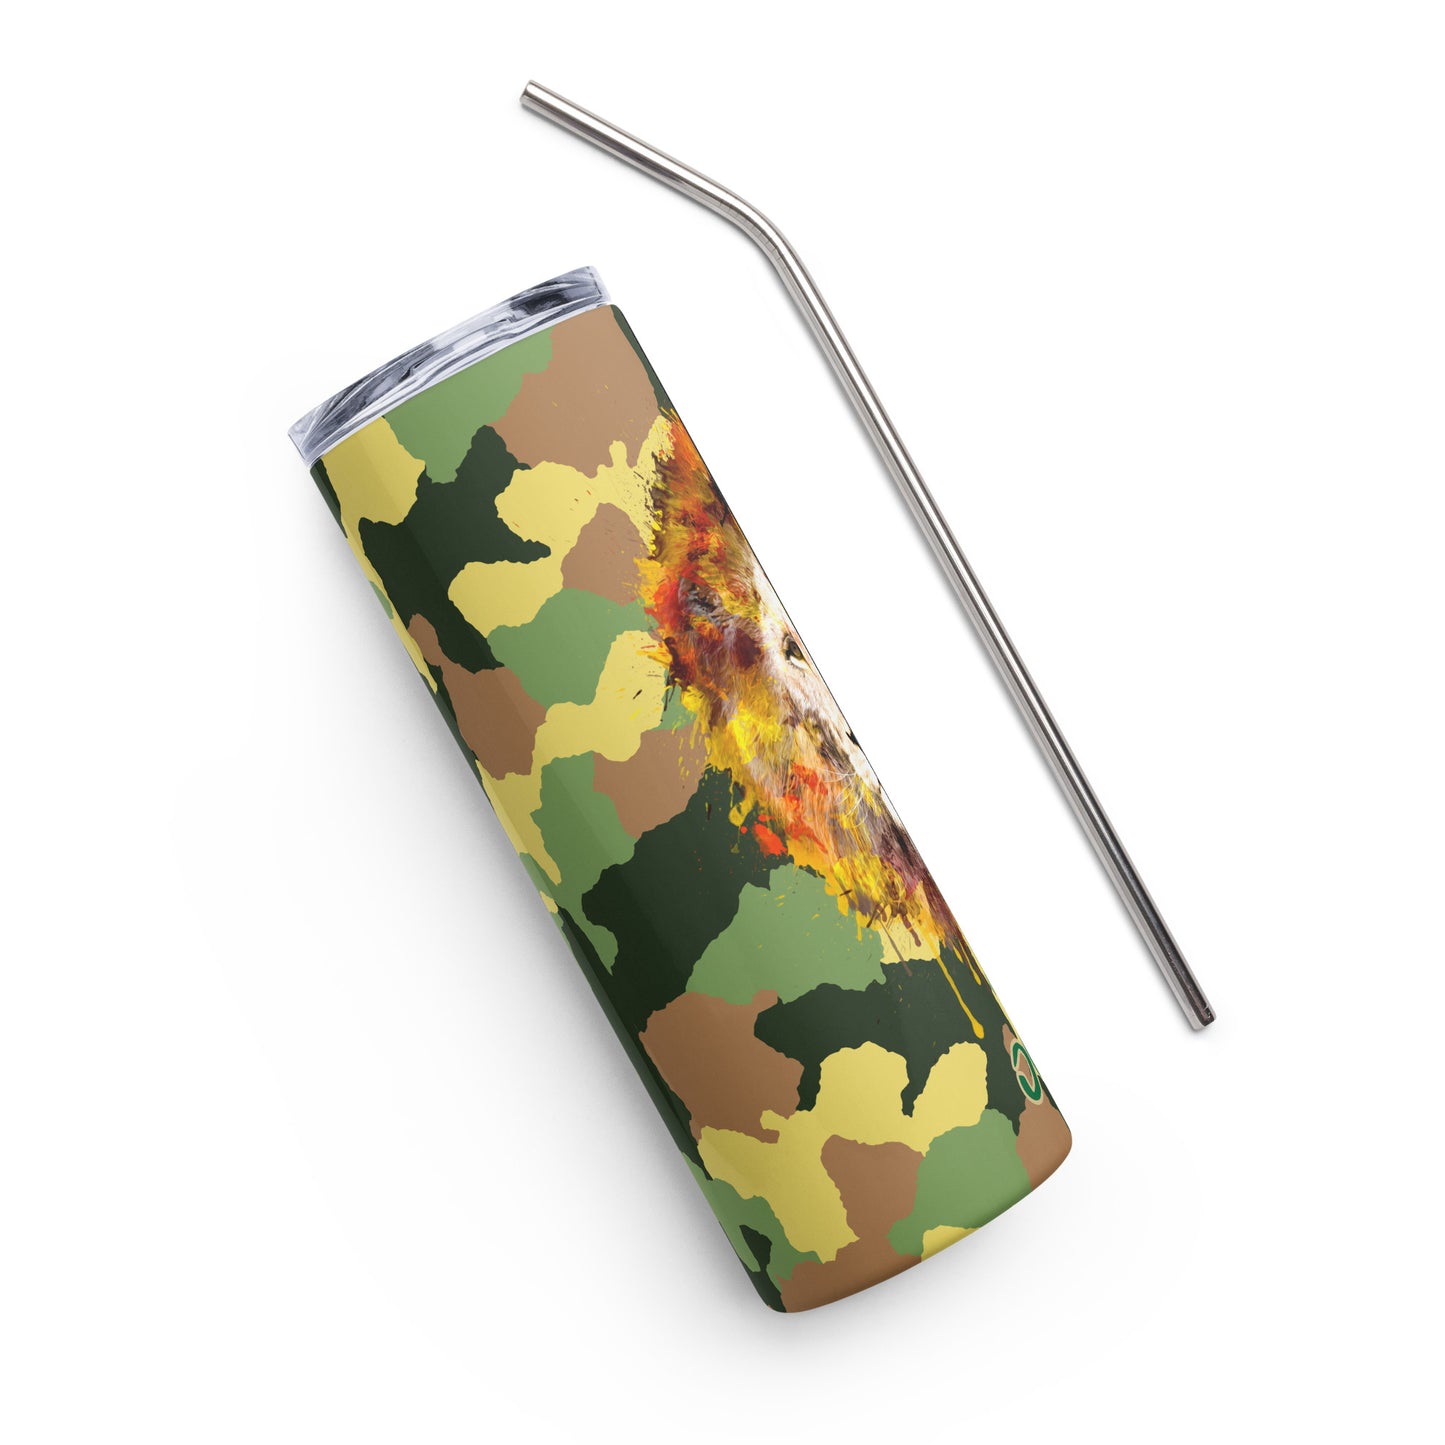 Army Camo Stainless Steel Tumbler